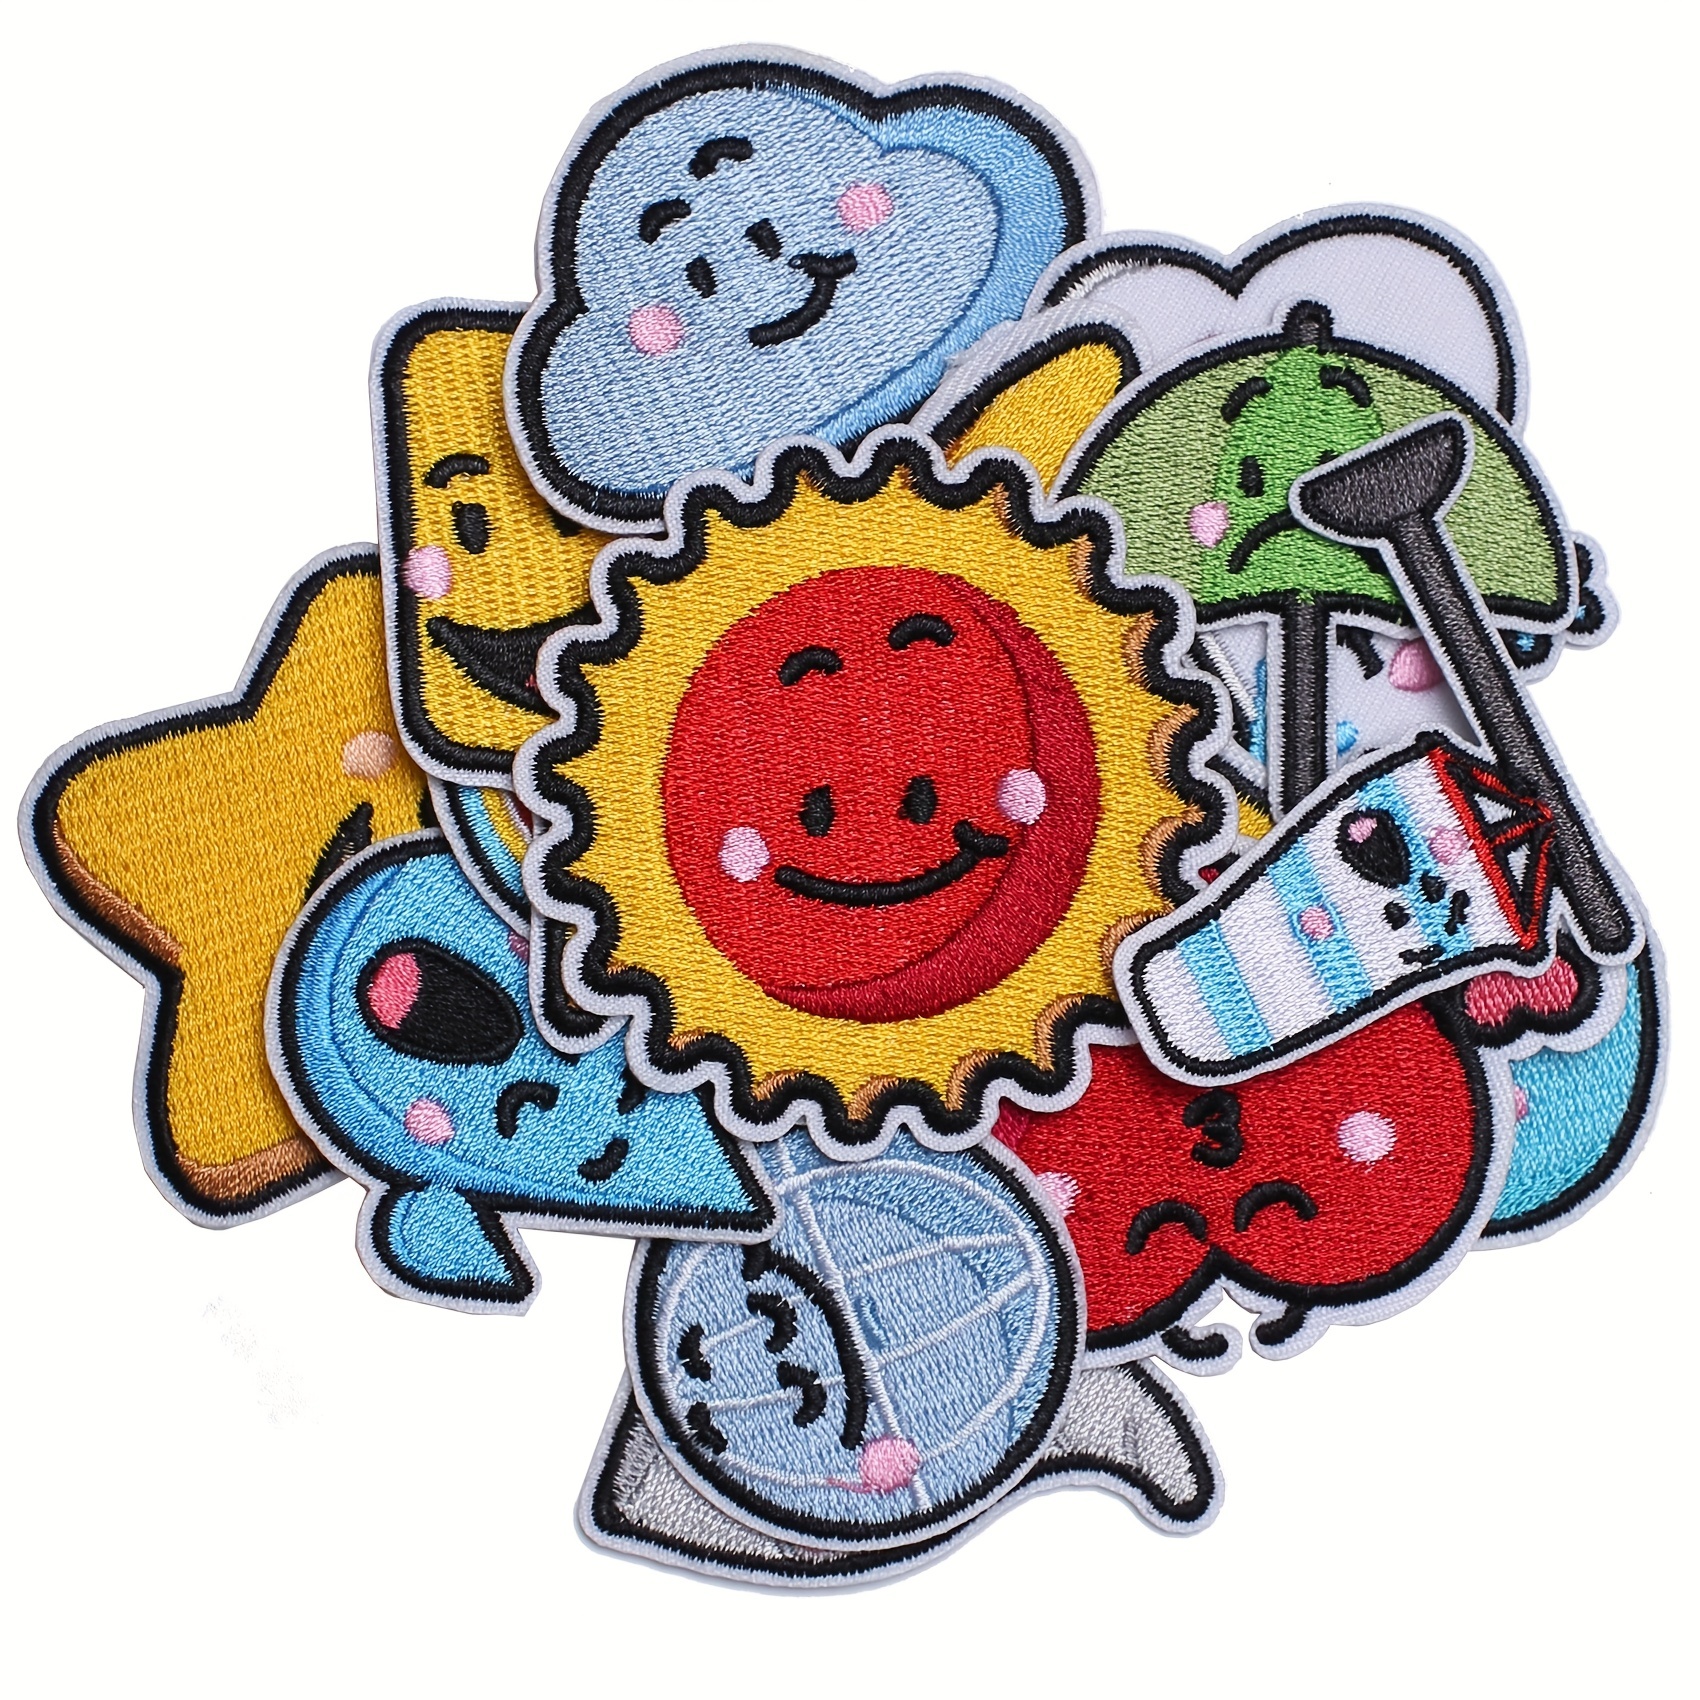 Iron on Patches,16 Pieces Embroidered Applique Patches,Sew on Iron on Patches Fabric Repair Patches Cute Cartoon Anime Patches for Kids Adult